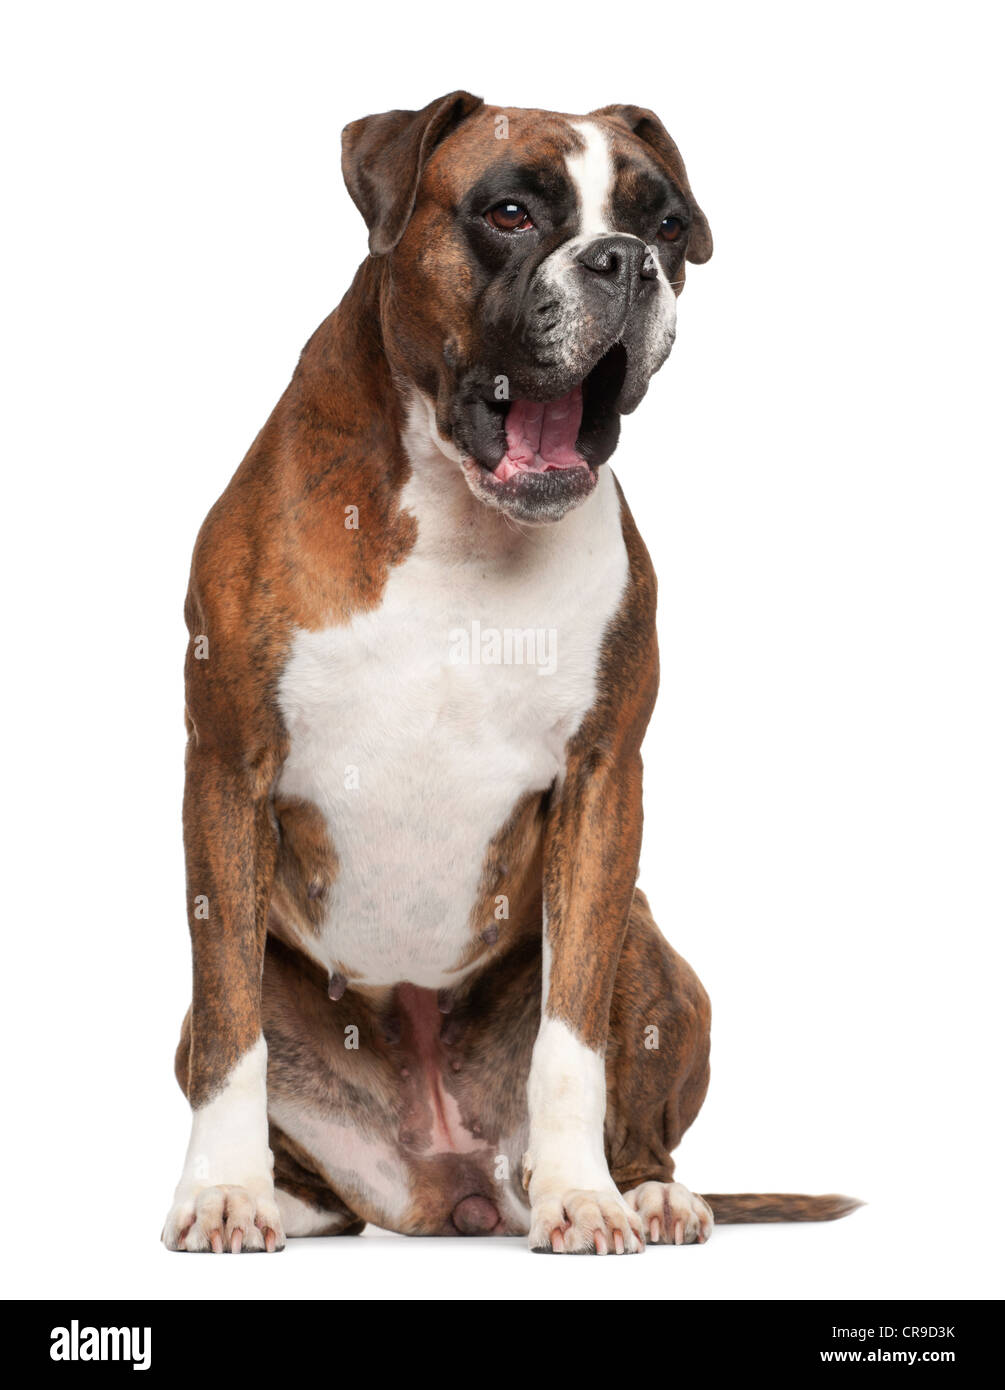 Boxer, 3 years old, barking against white background Stock Photo